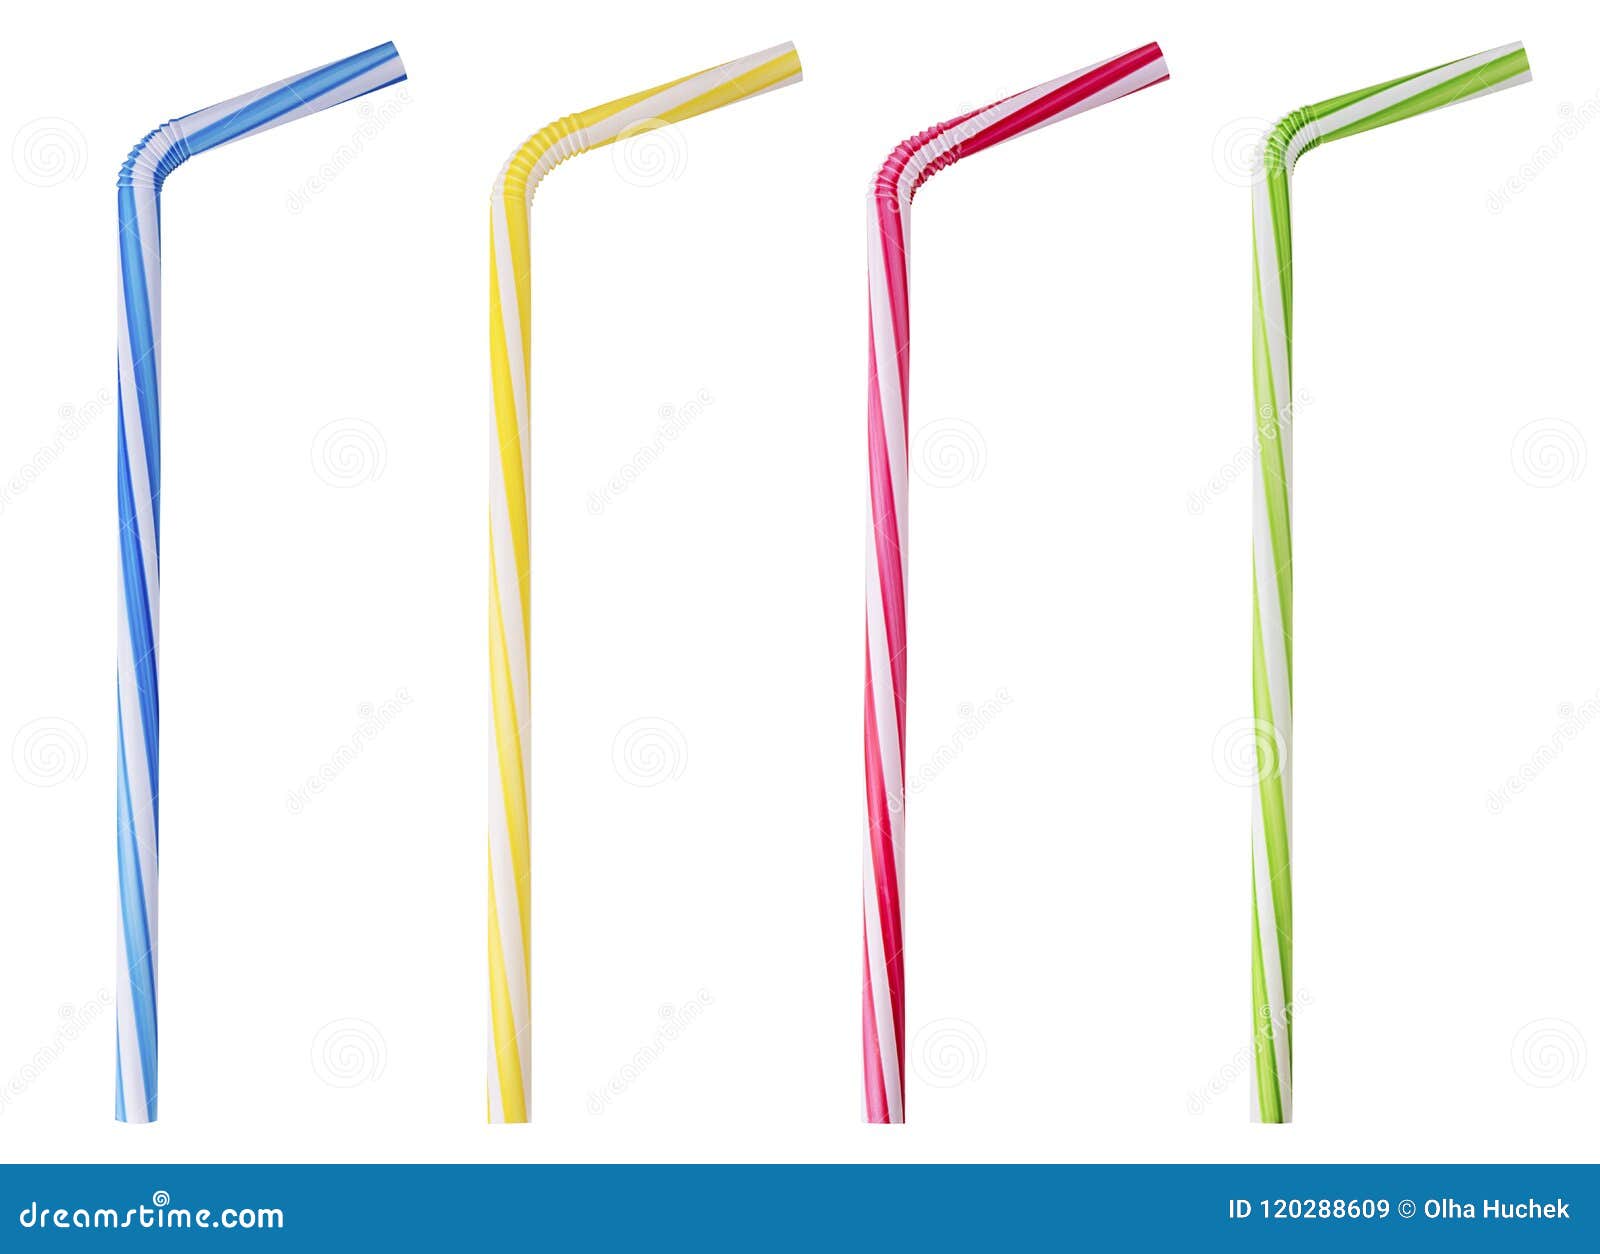 four drinking straw pink, blue, yellow, green striped